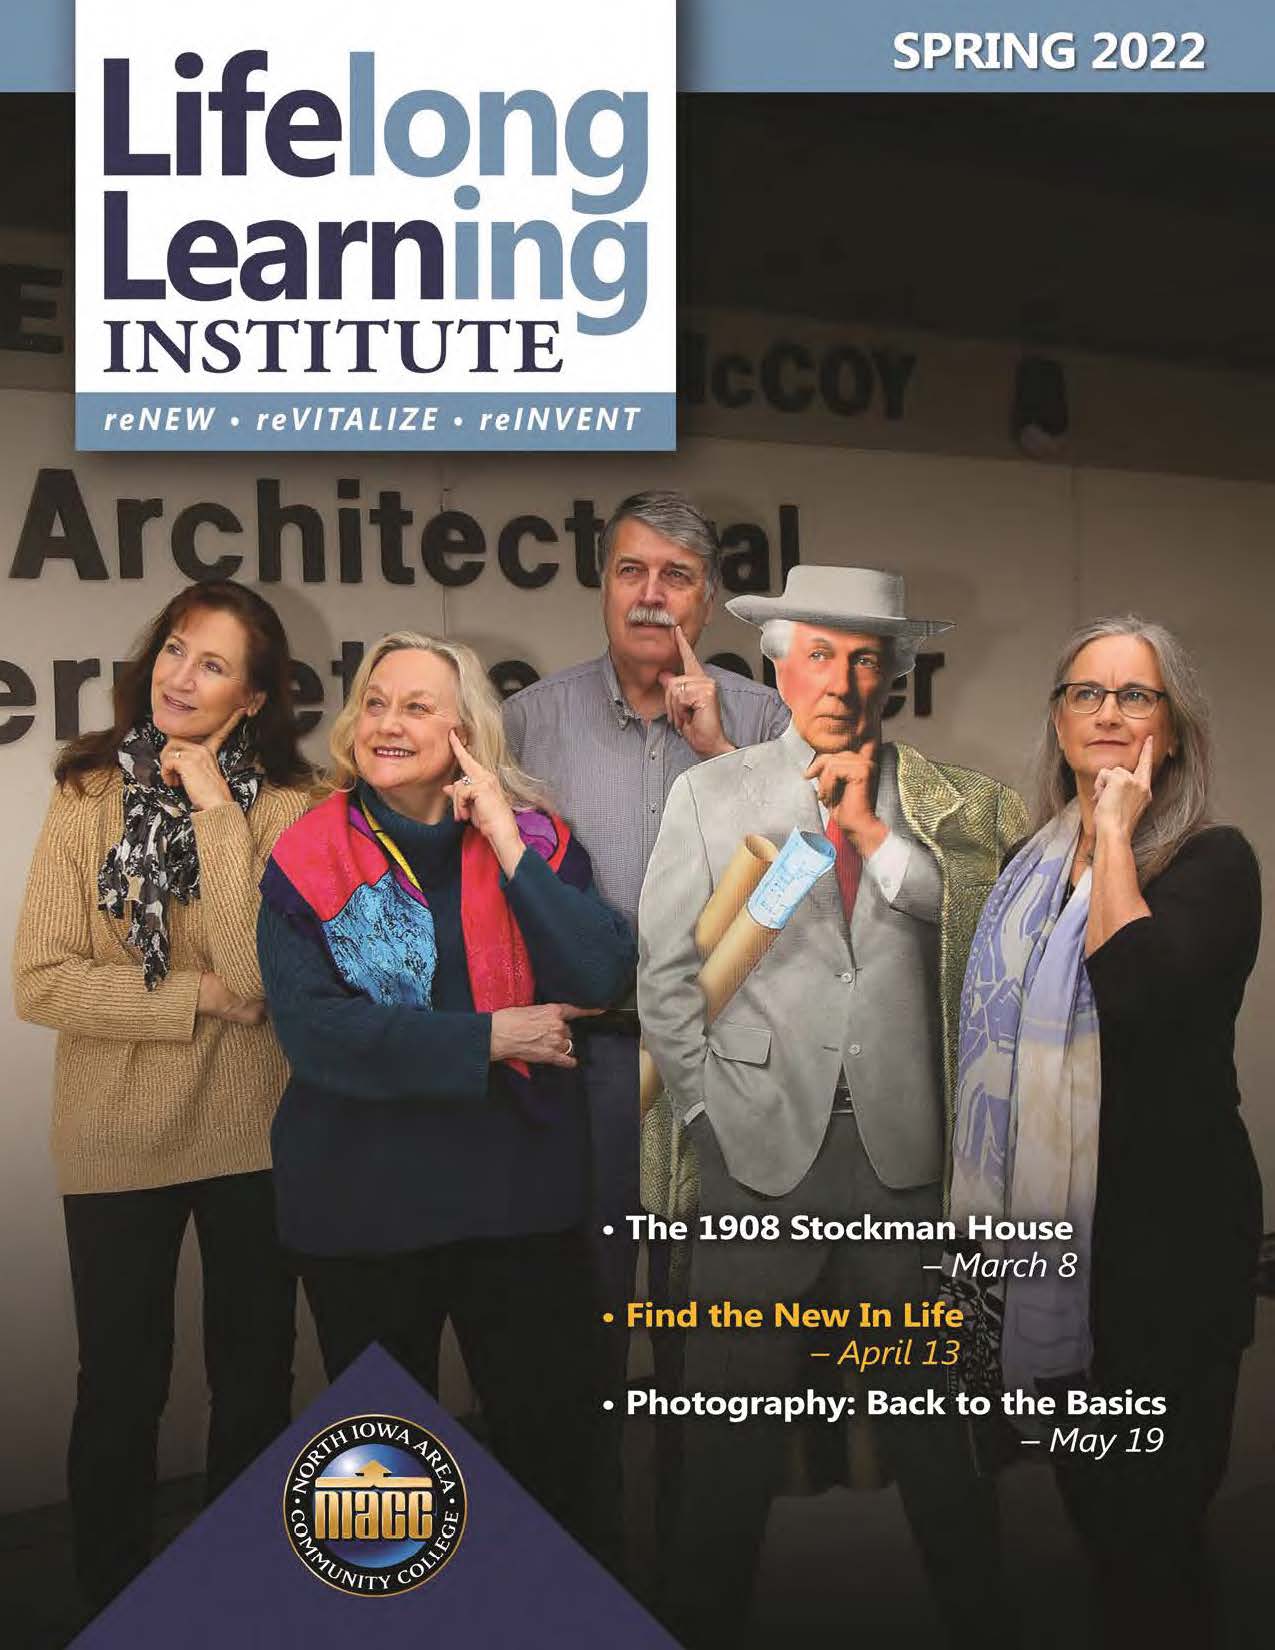 Cover image for the Lifelong Learning Spring 2022 Brochure